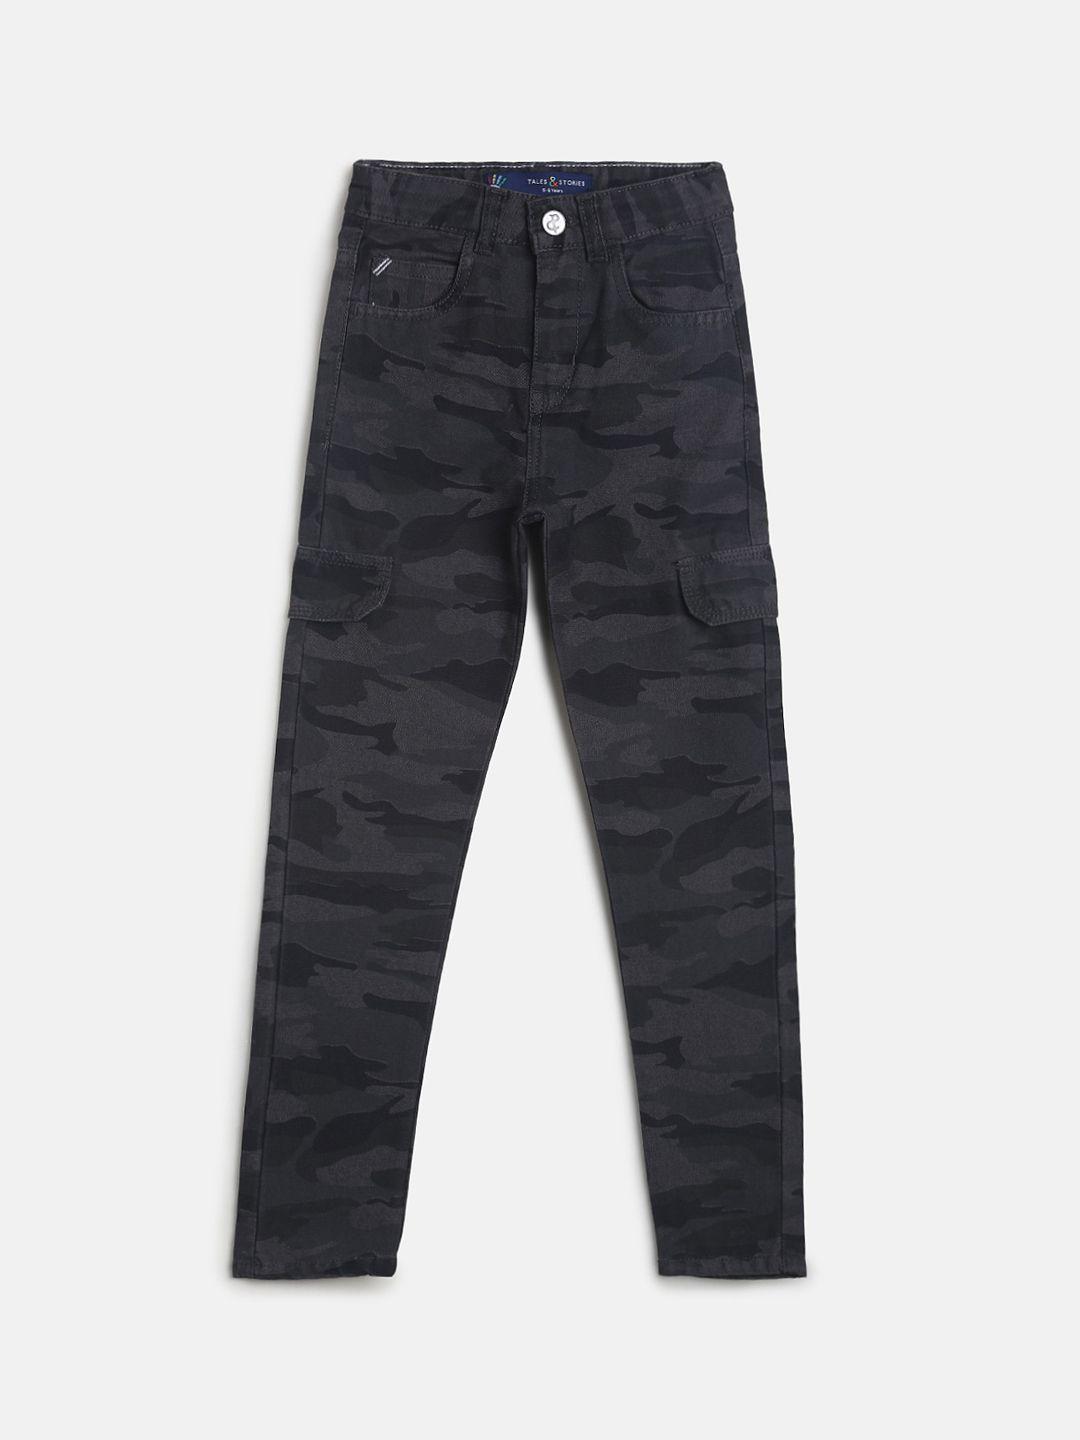 tales-&-stories-boys-grey-camouflage-printed-slim-fit-cargos-trousers